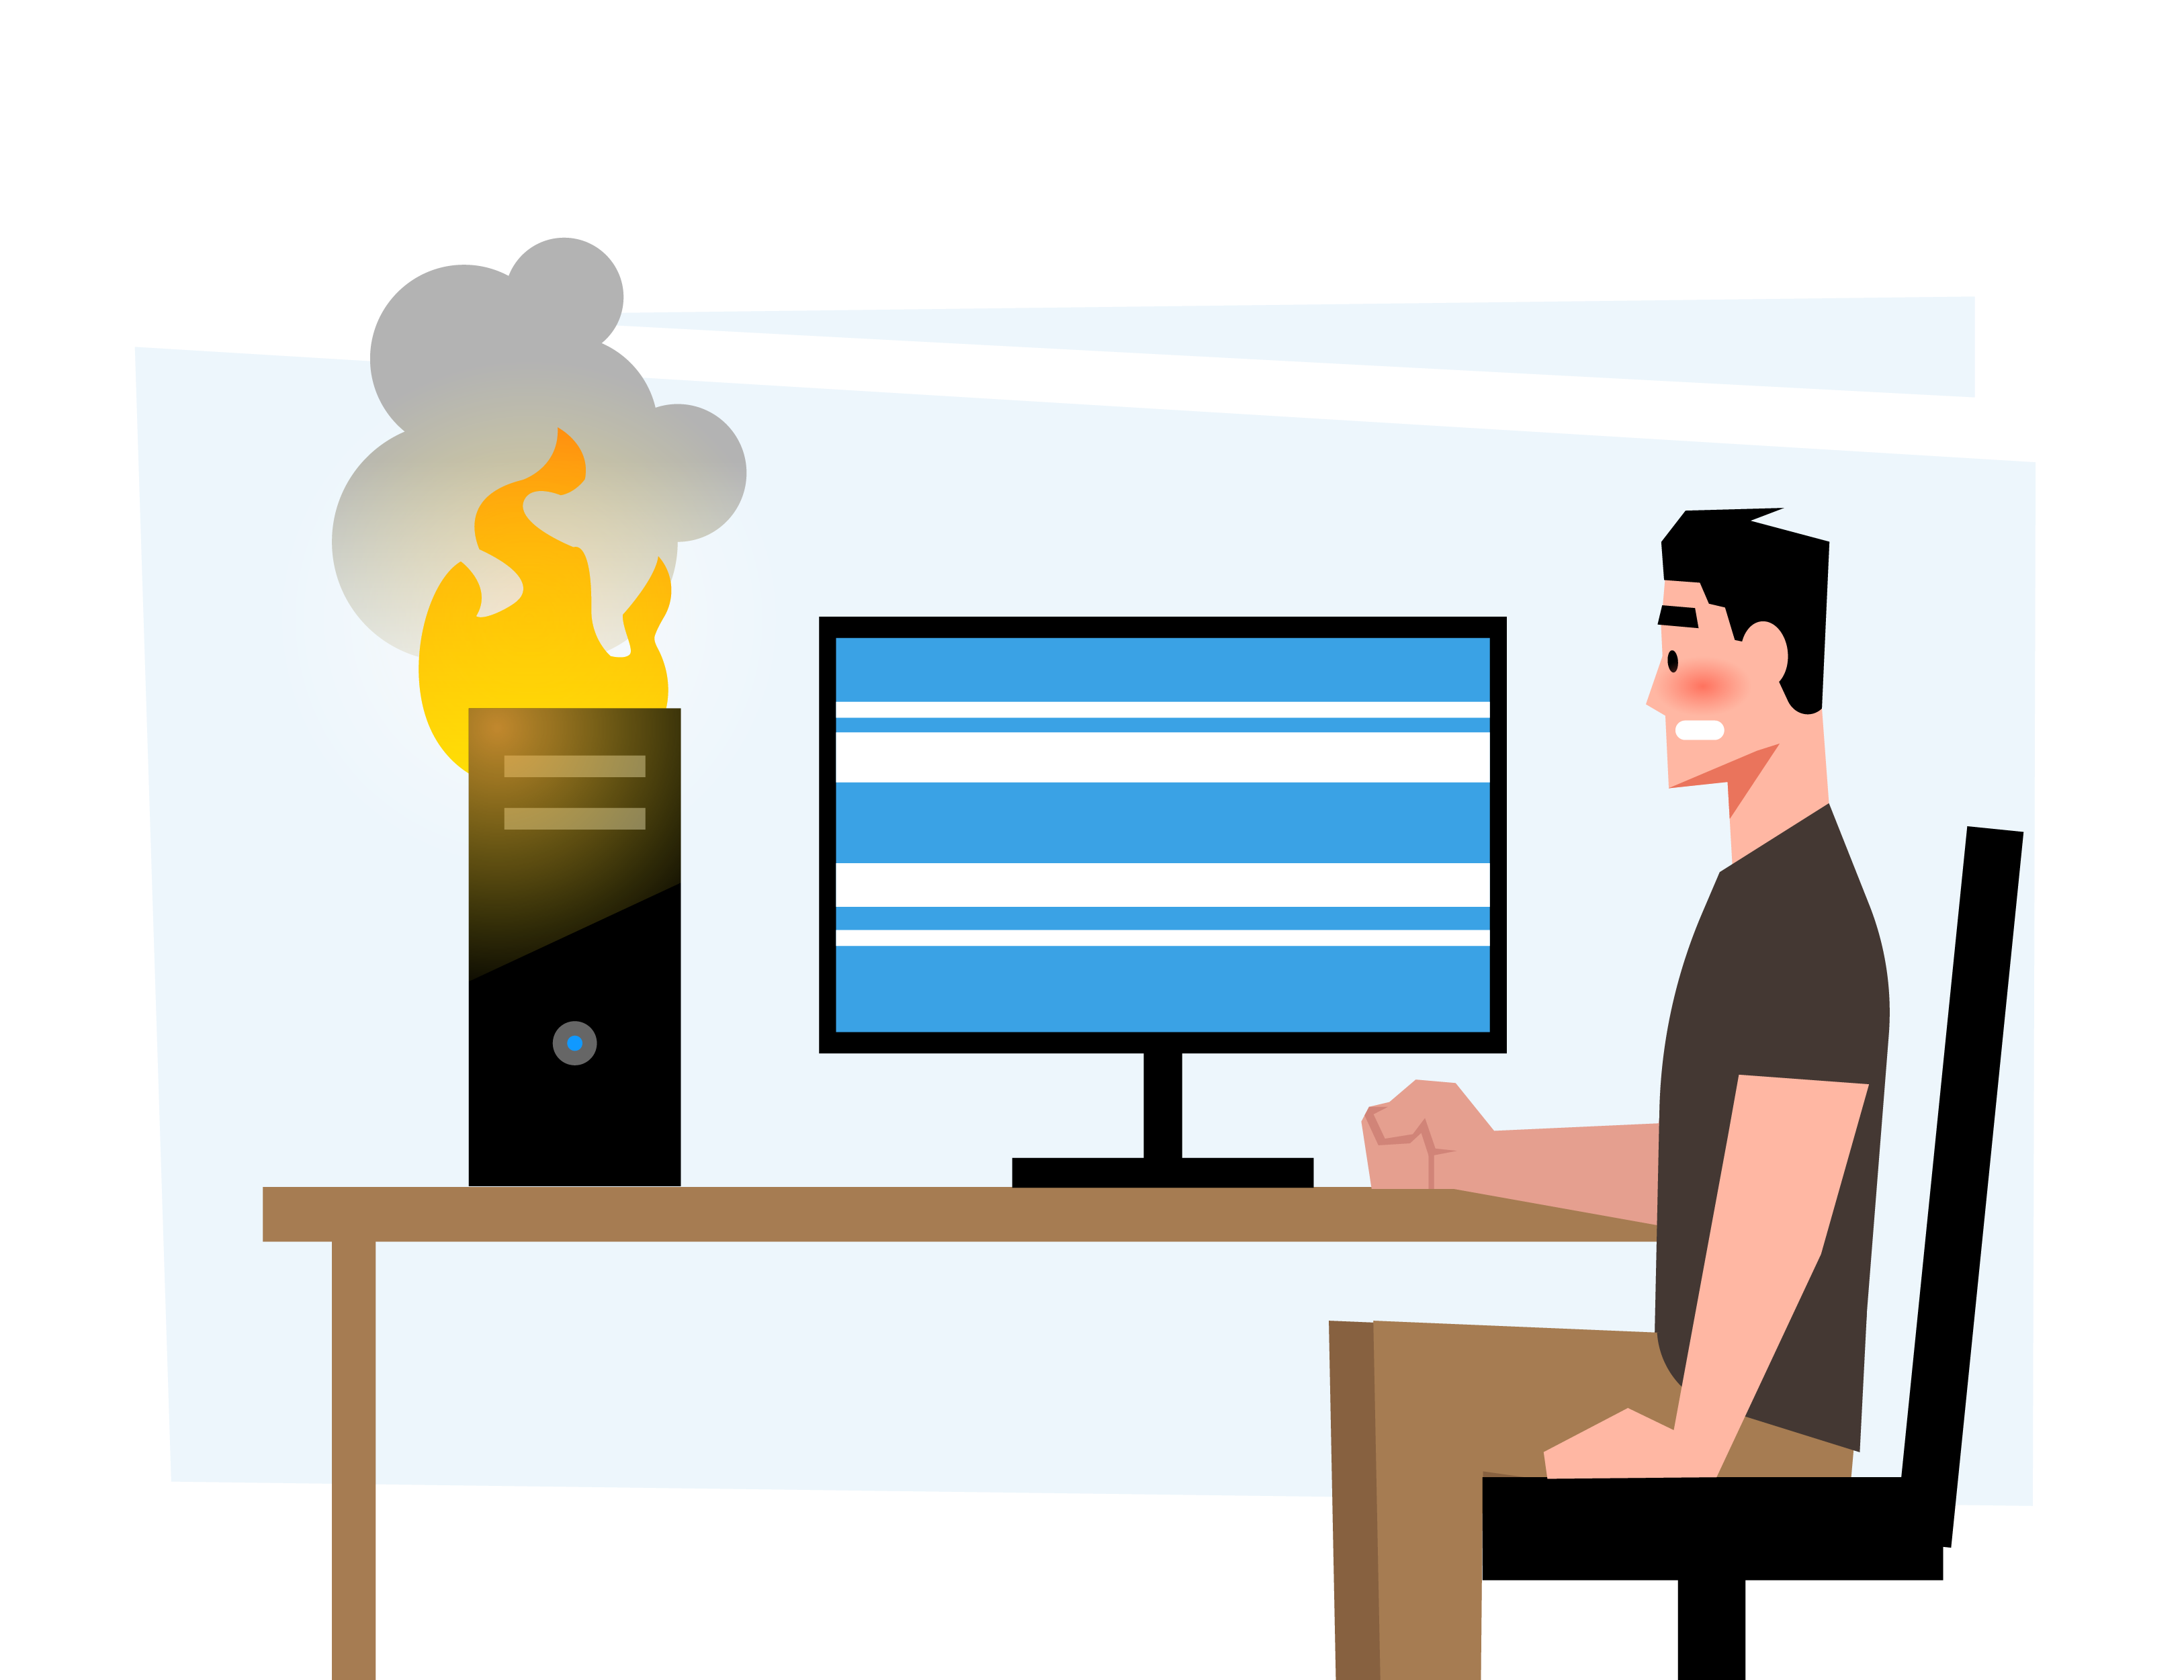 Computer-on-Fire-Illustration-PhotographyLife